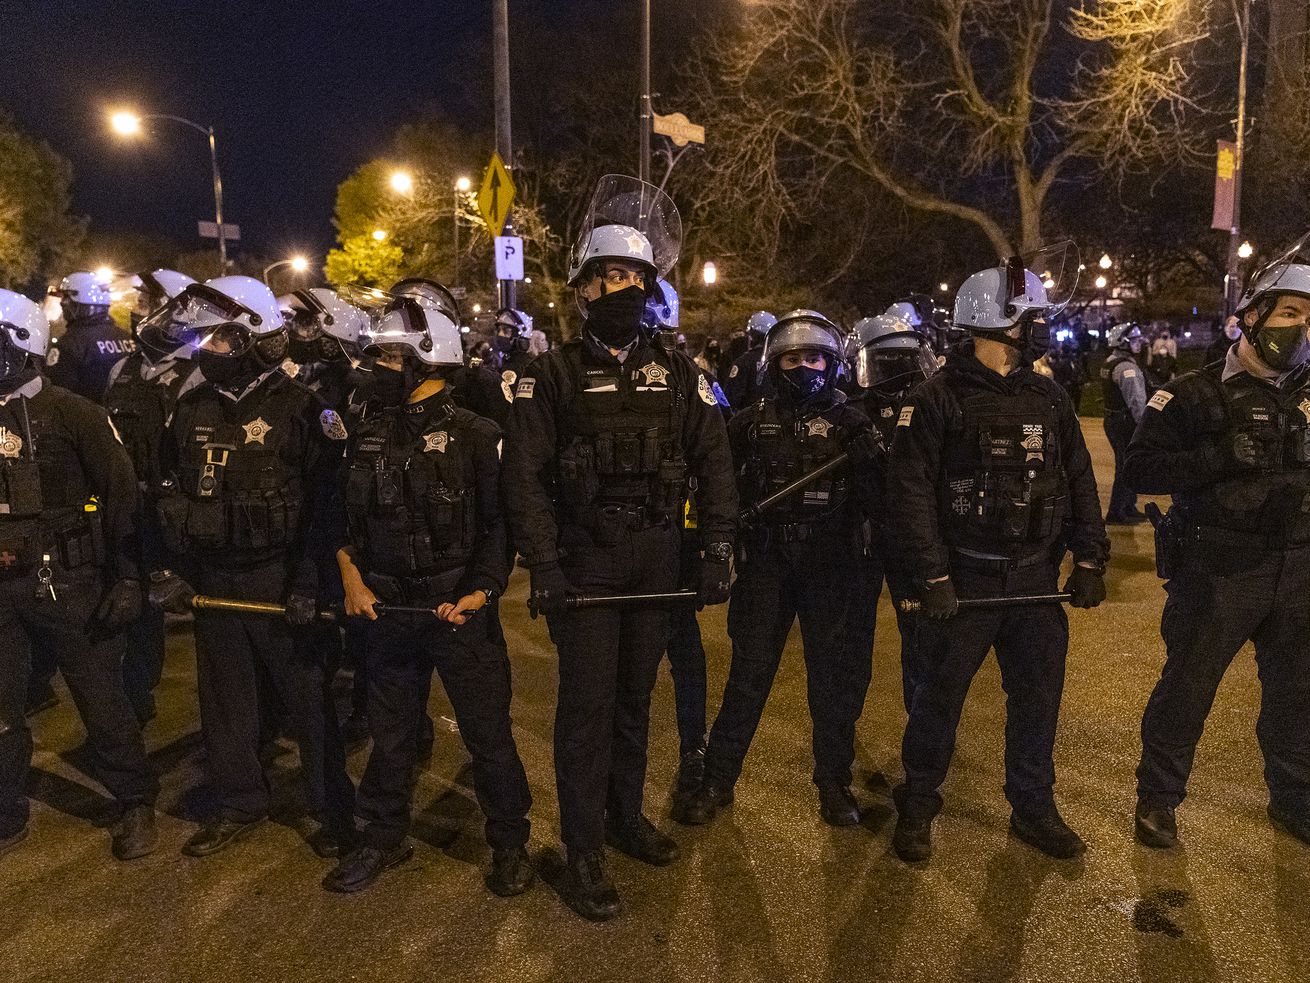 Chicago police form a line with batons out after an earlier clash with protesters near Logan Square Park in Chicago Friday, April 16, 2021, a day after the release of video that shows a Chicago police officer fatally shoot a 13-year-old last month.